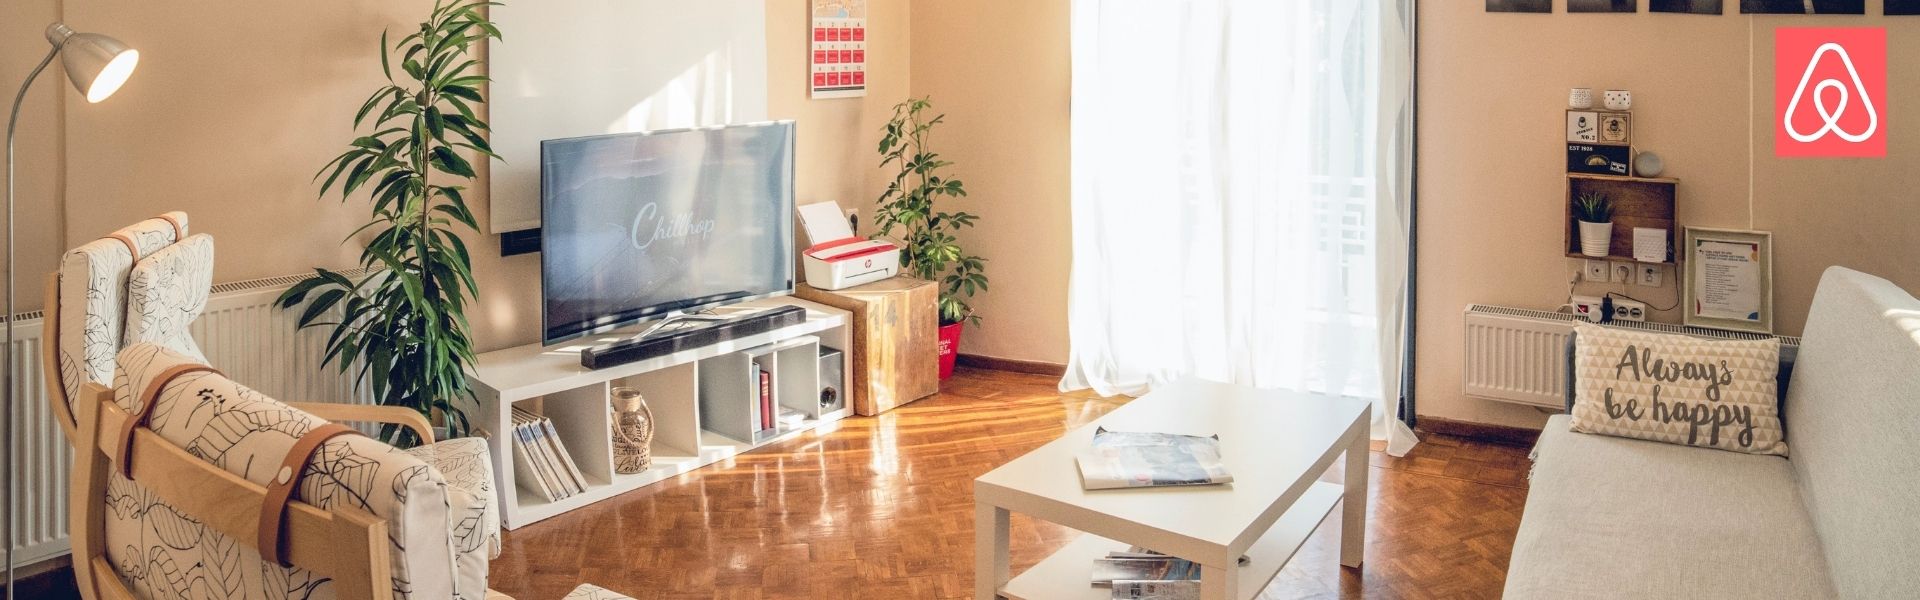 Why Use a Professional Cleaning Service for Your Airbnb Rental?